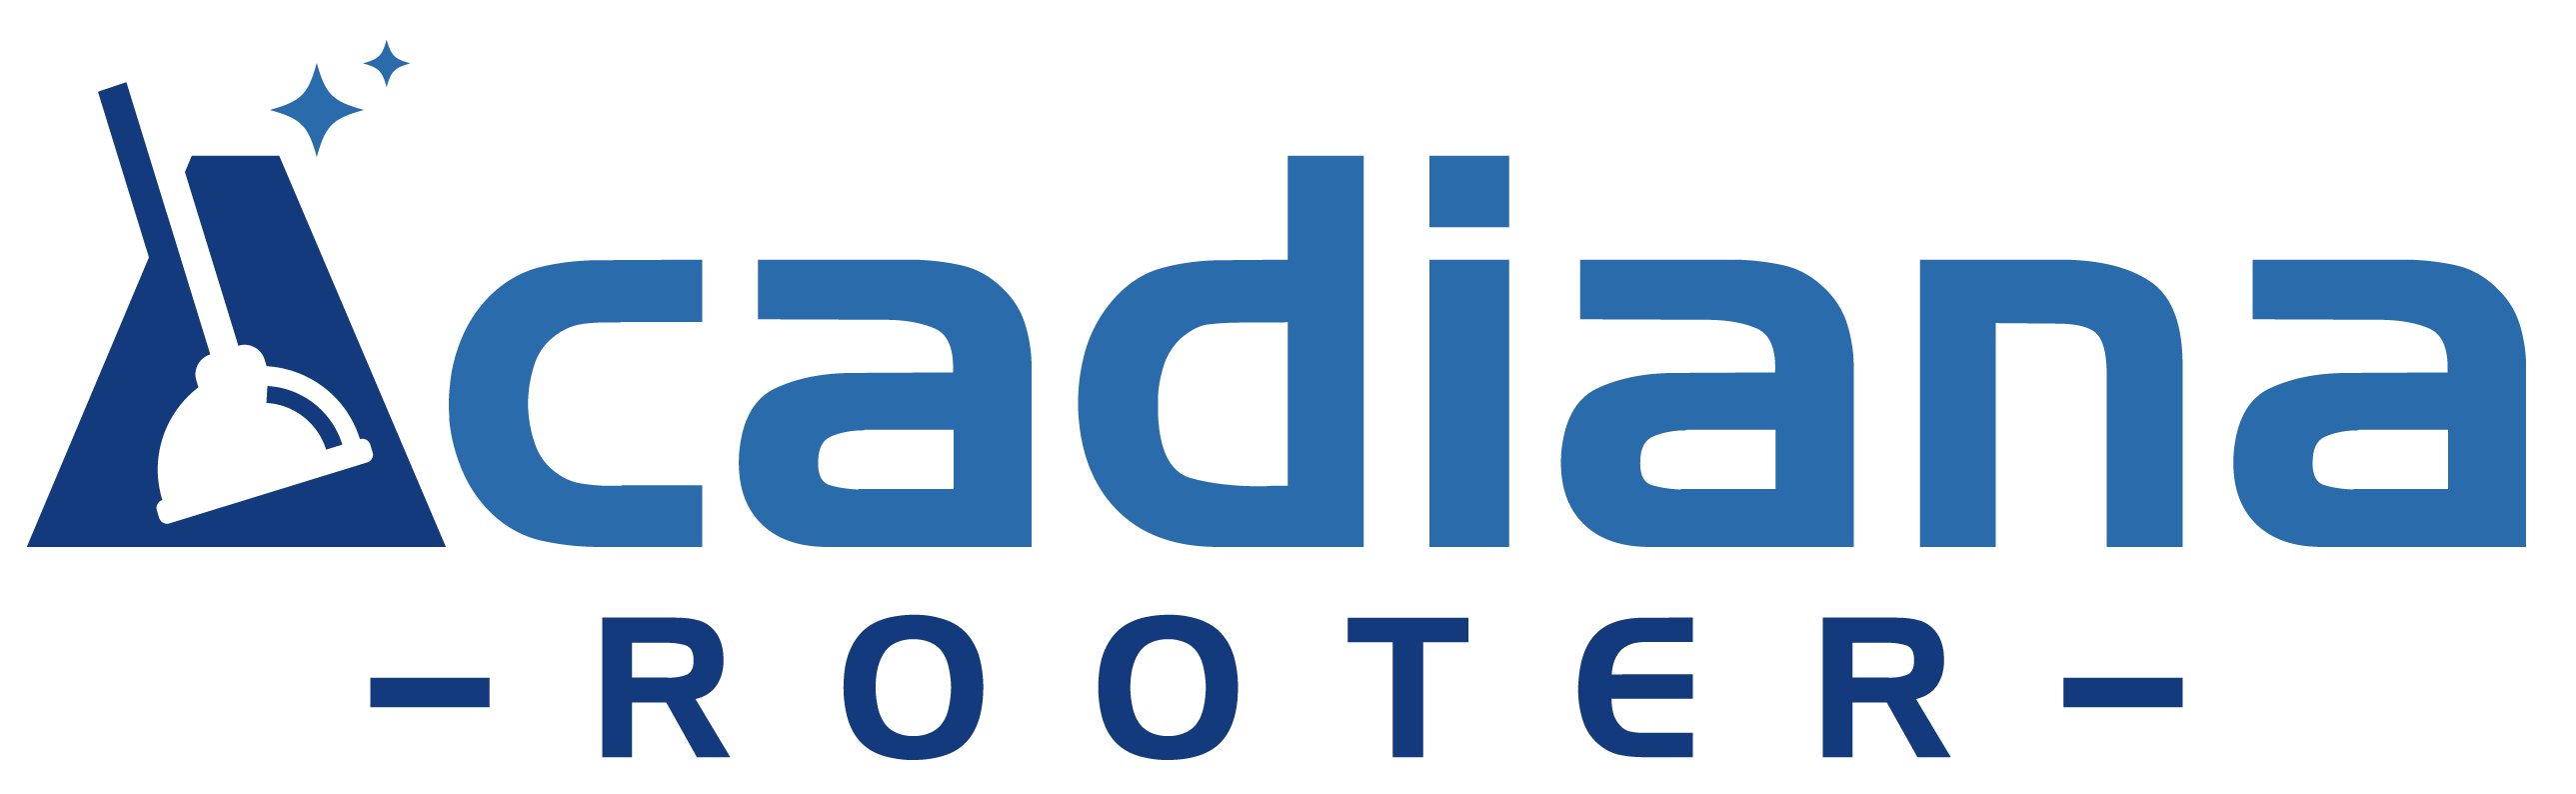 Acadiana-Rooter-Logo-Color-1